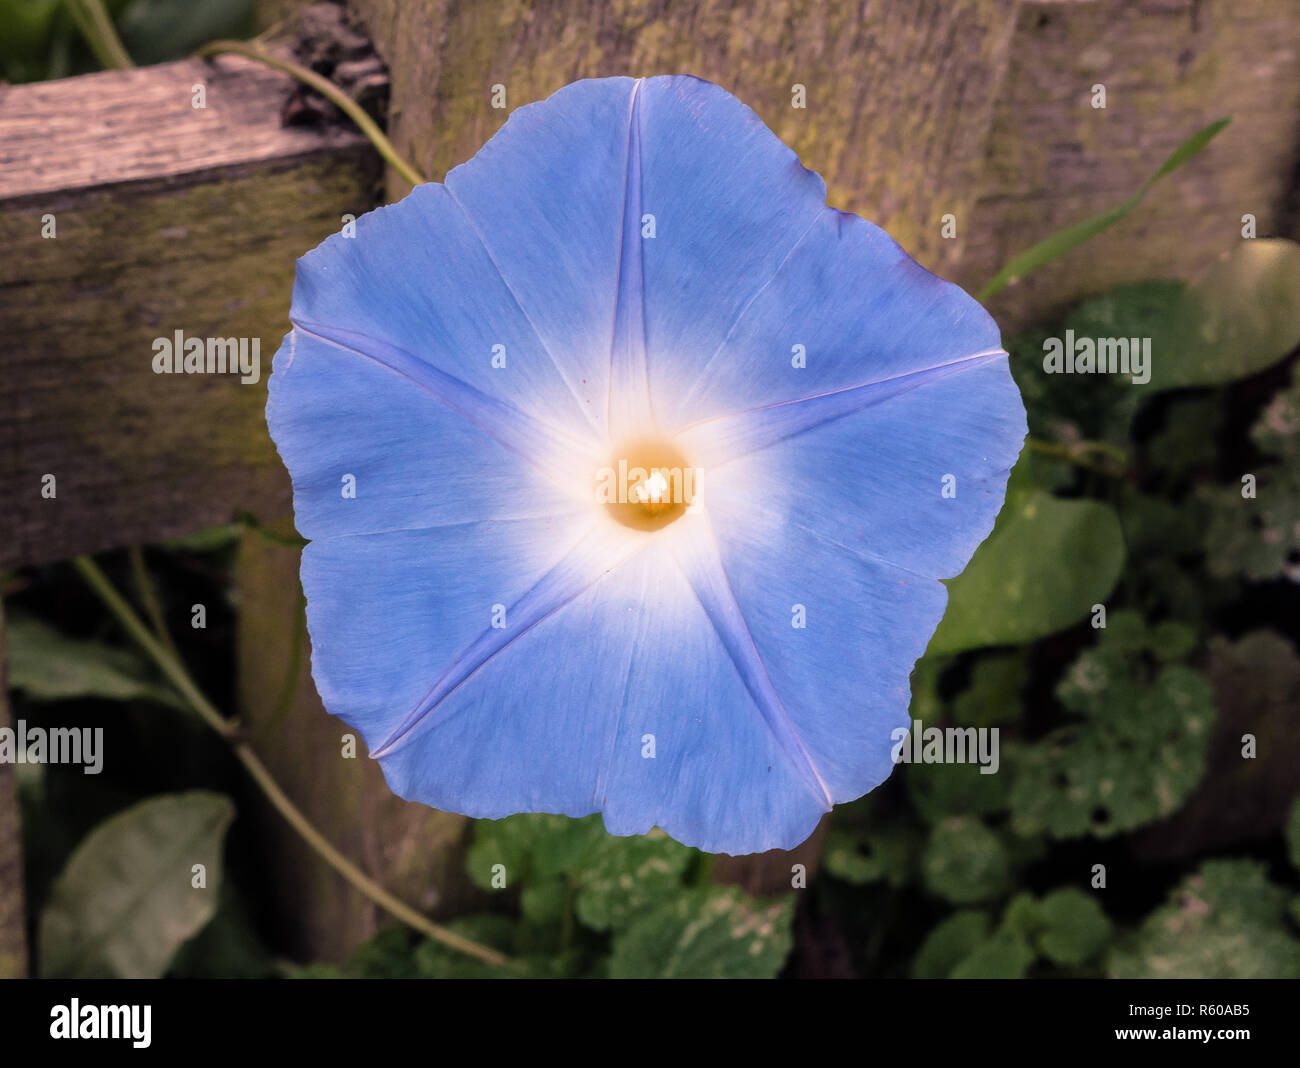 Morning Glory Heavenly Blue Flower Plant Up Close Stock Photo